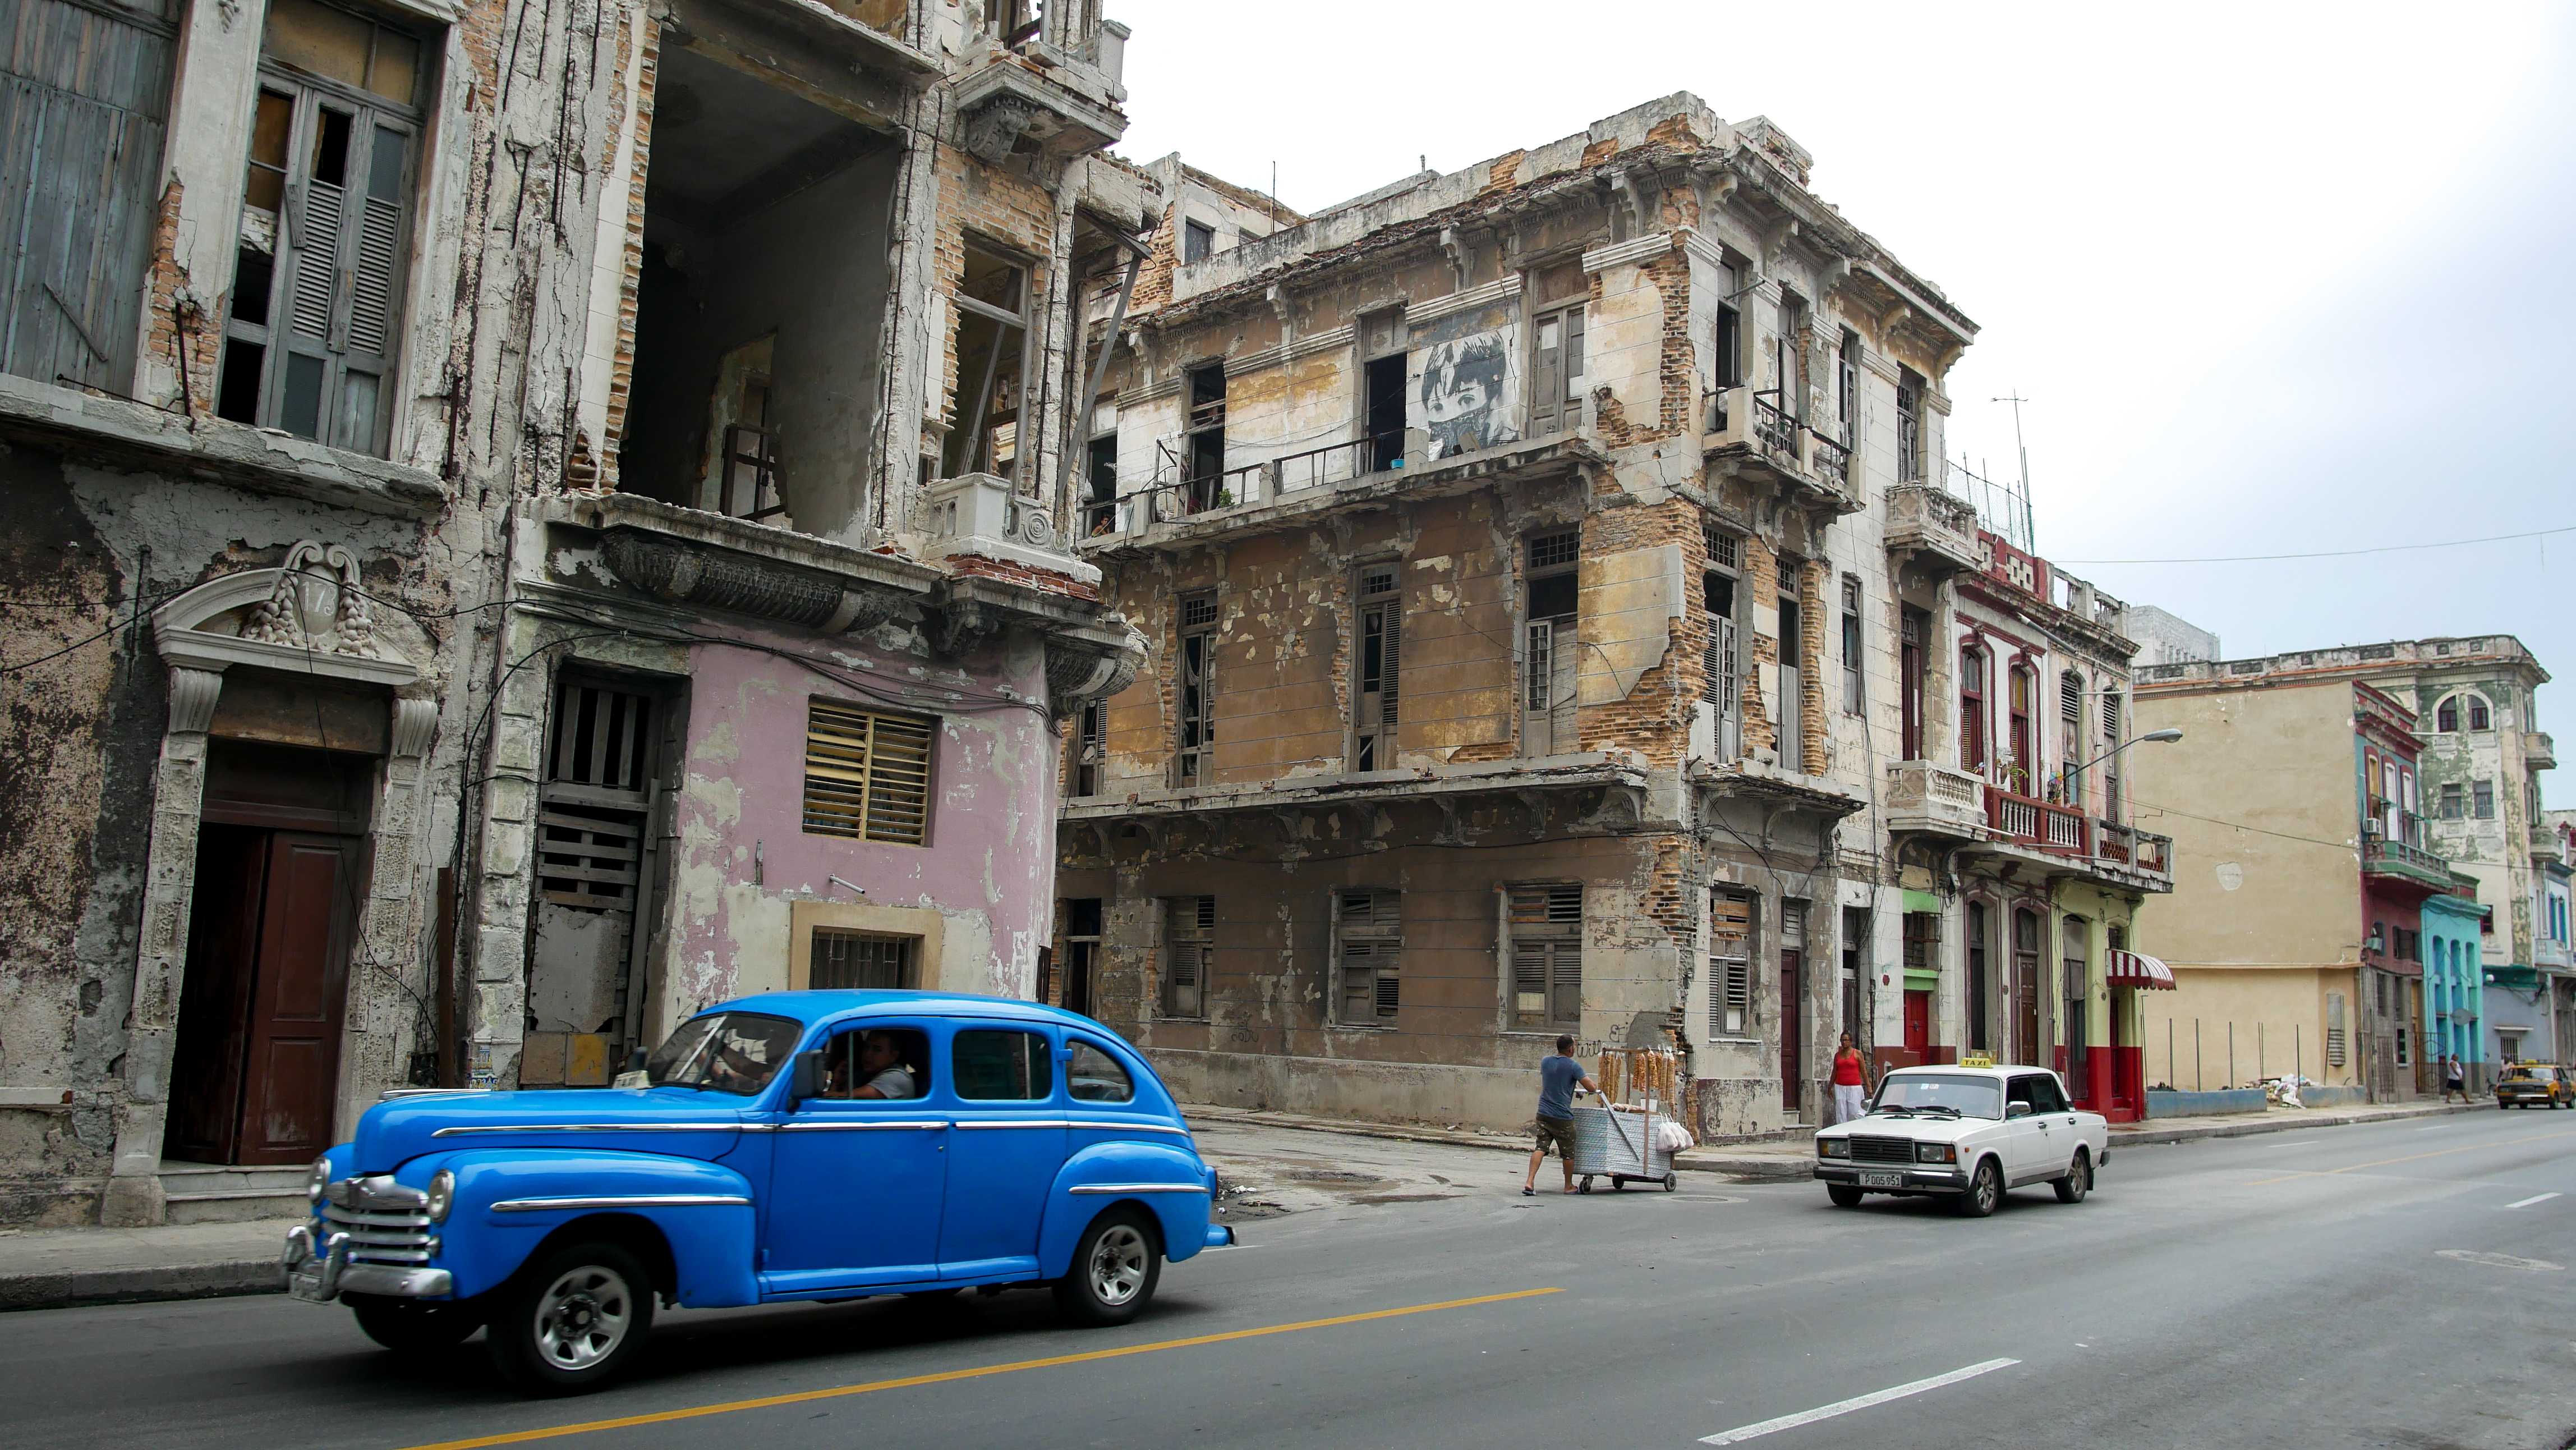 How Havana Is Collapsing, Building by Building | Pulitzer Center